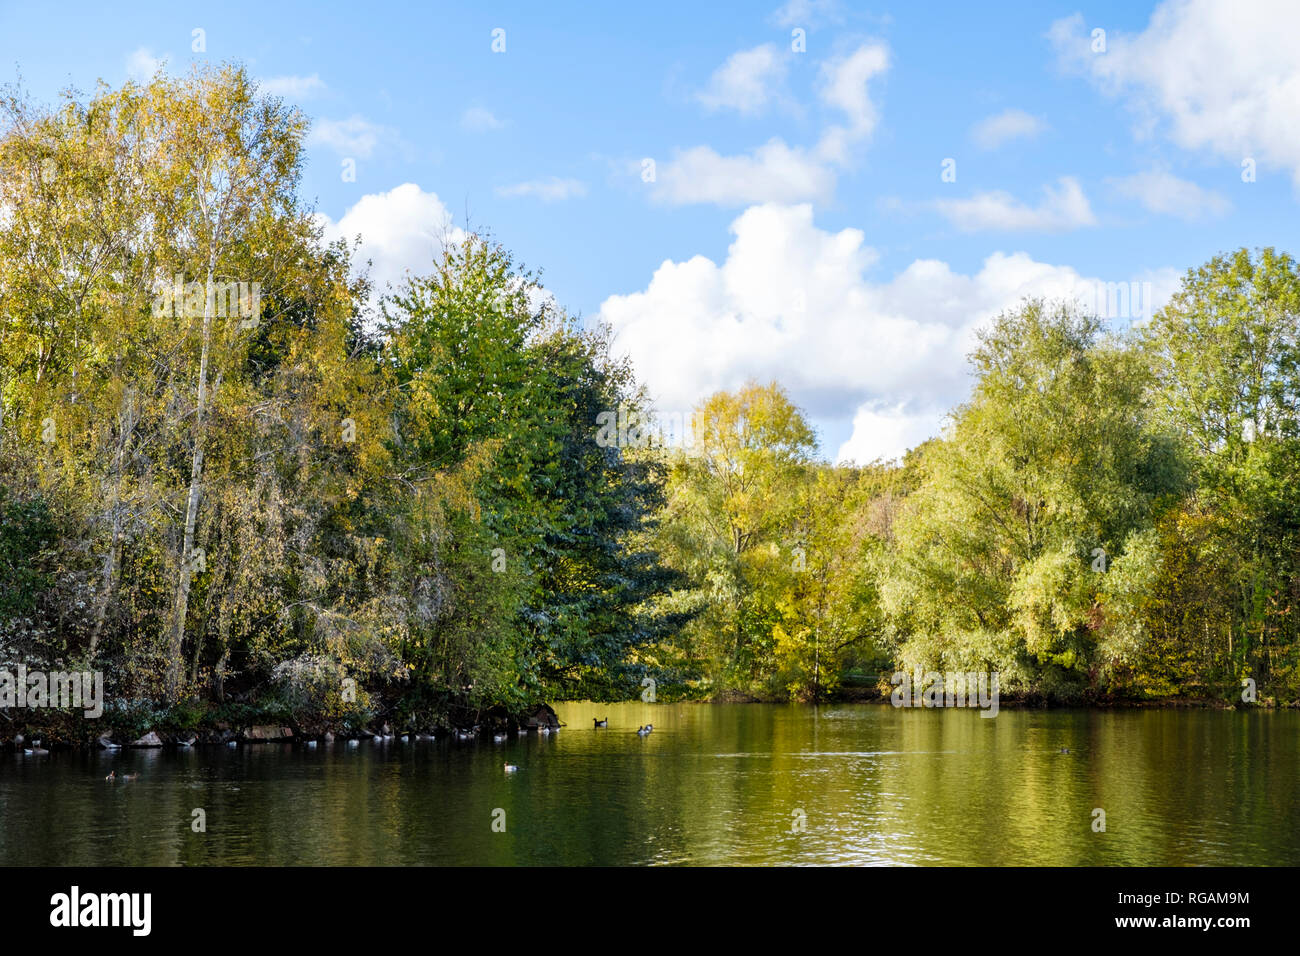 Autumn landscape. Trees around the edge of a lake at Colwick Country Park, Nottingham, England, UK Stock Photo